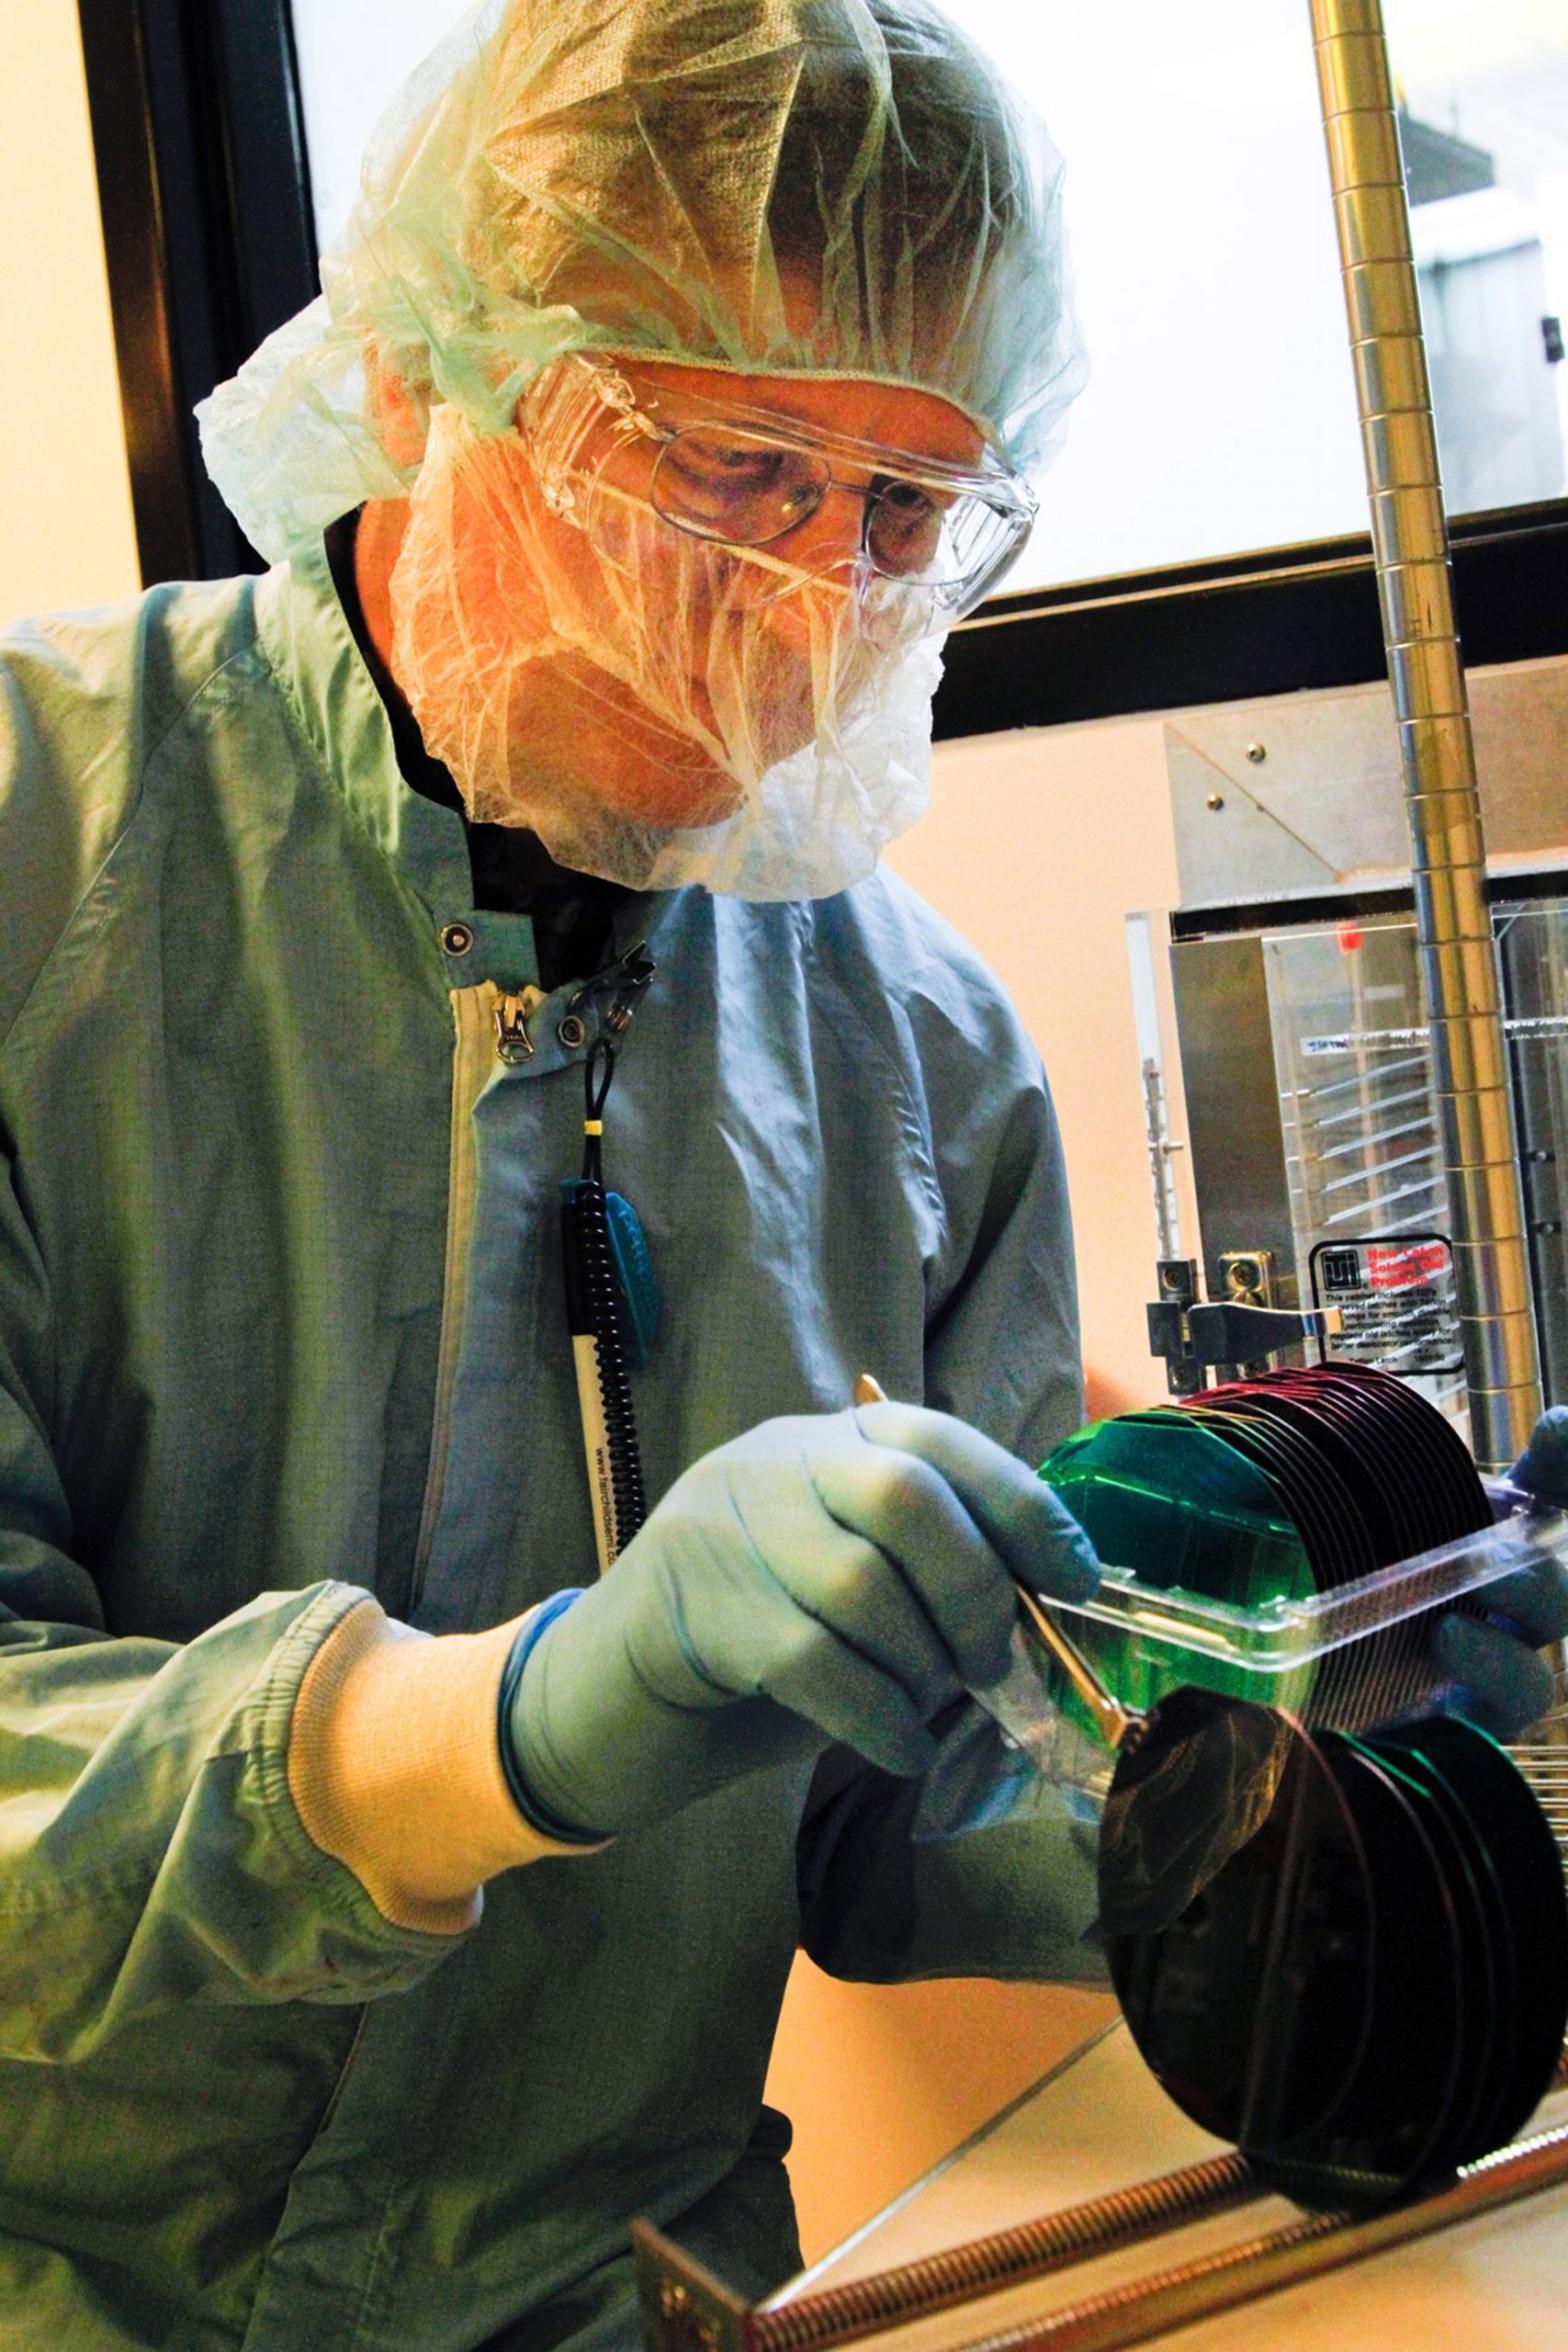 A researcher processes semiconductor wafers in the University of Utah's nanofabrication lab. Experienced engineers use advanced facilities and techniques like this at the university's new Center for Engineering Innovation, which transforms inventors' ideas into ready-to-manufacture devices.